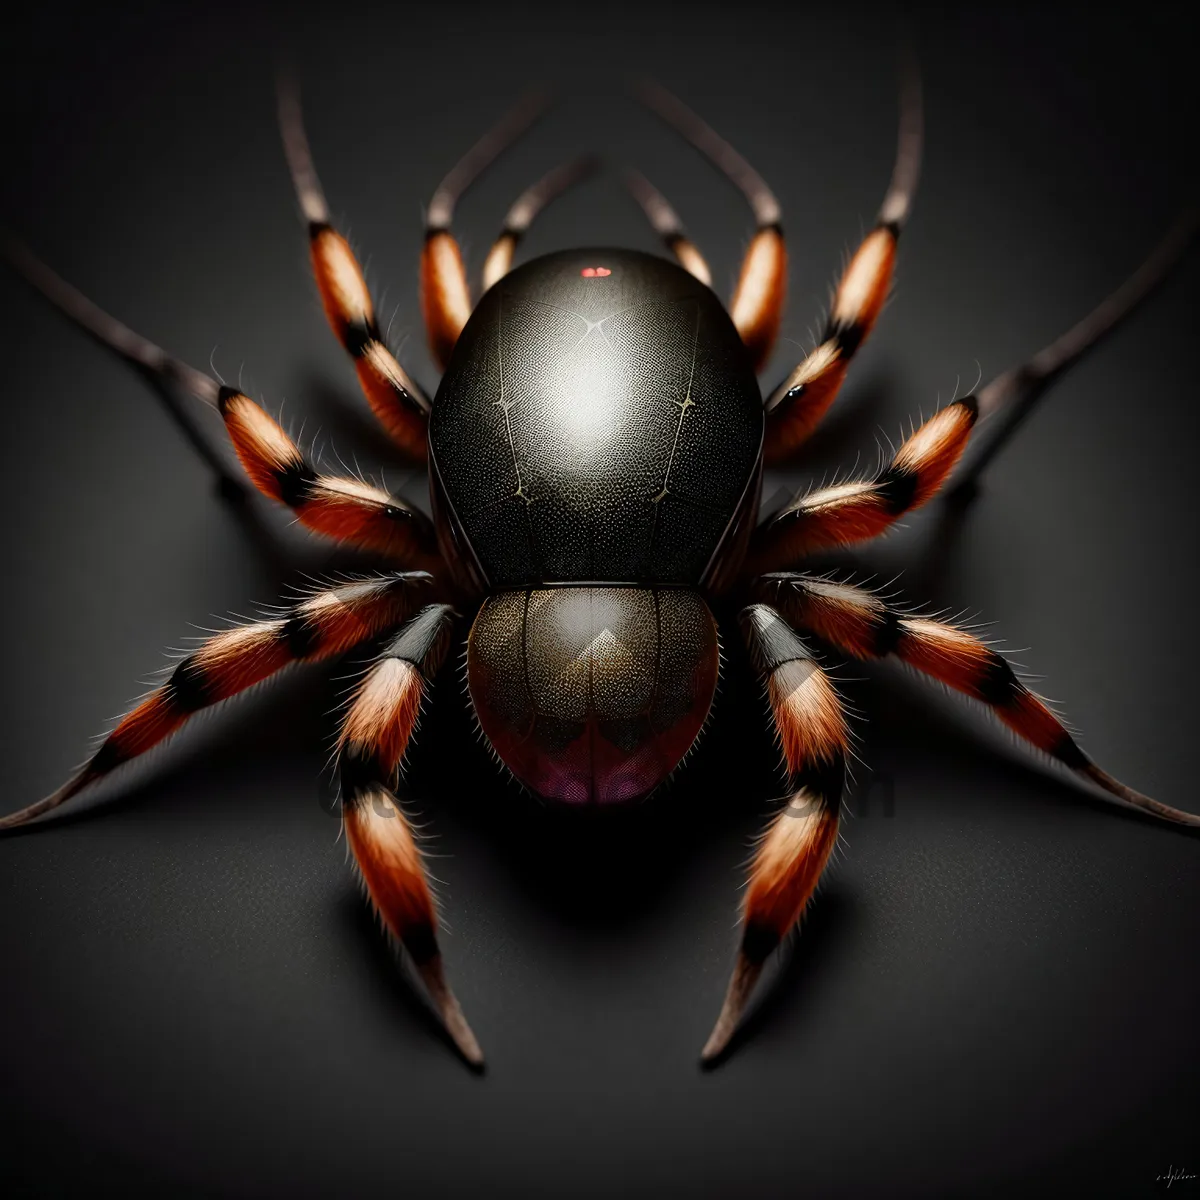 Picture of Close-up of Black Widow Spider - Arachnid with Red Hourglass